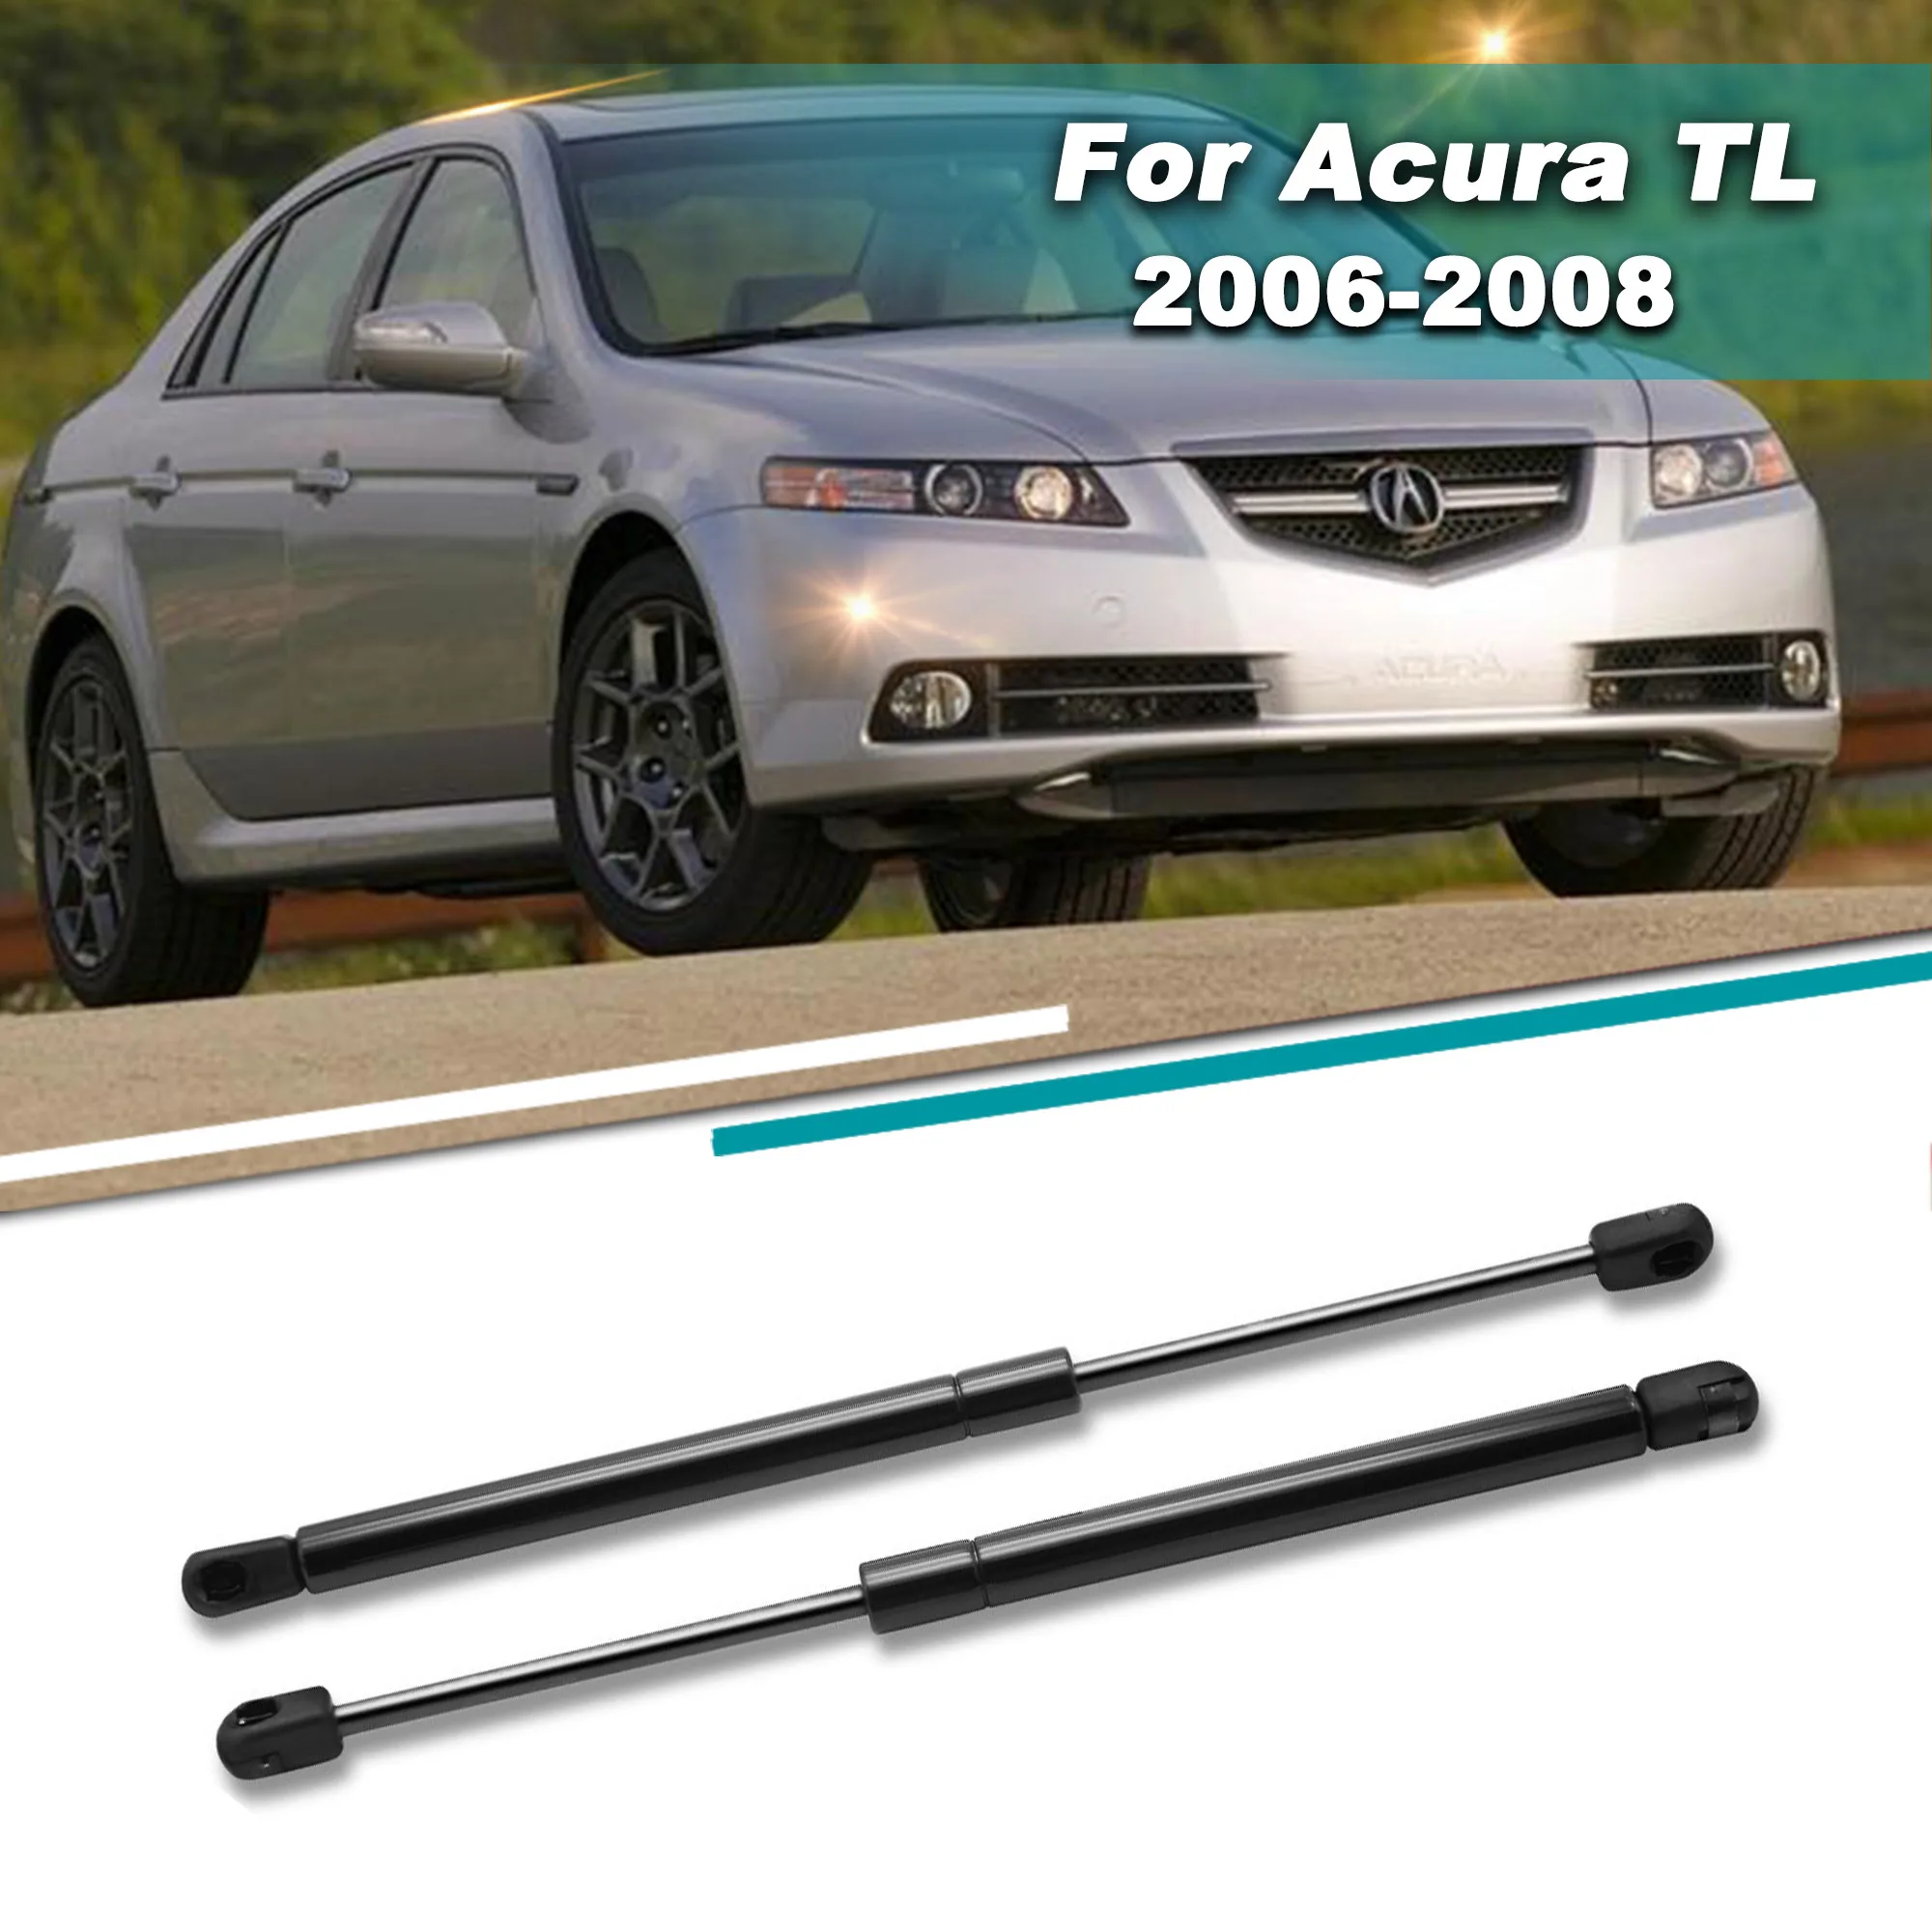 

2pcs Front Hood Support Rods For Acura TL 2006 2007 2008 Car Gas Spring Shock Absorb Lift Struts Replaceable Accessories